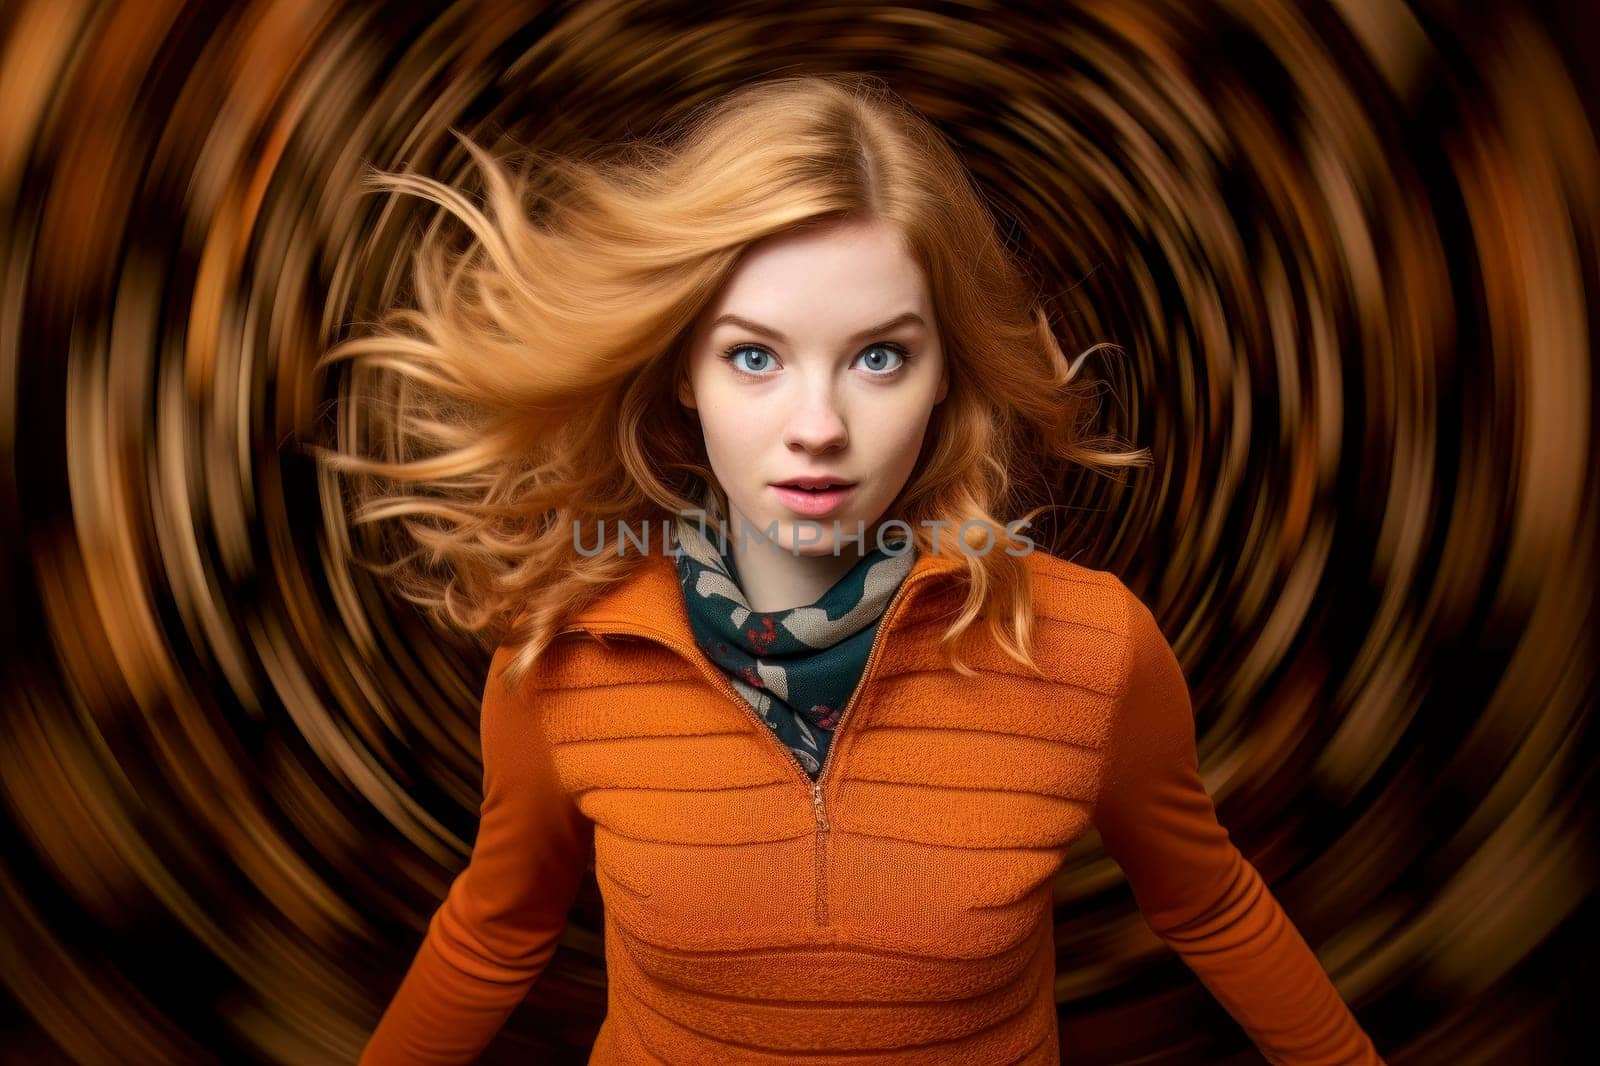 A captivating and artistic portrait showcasing the creativity and beauty of a blonde girl.